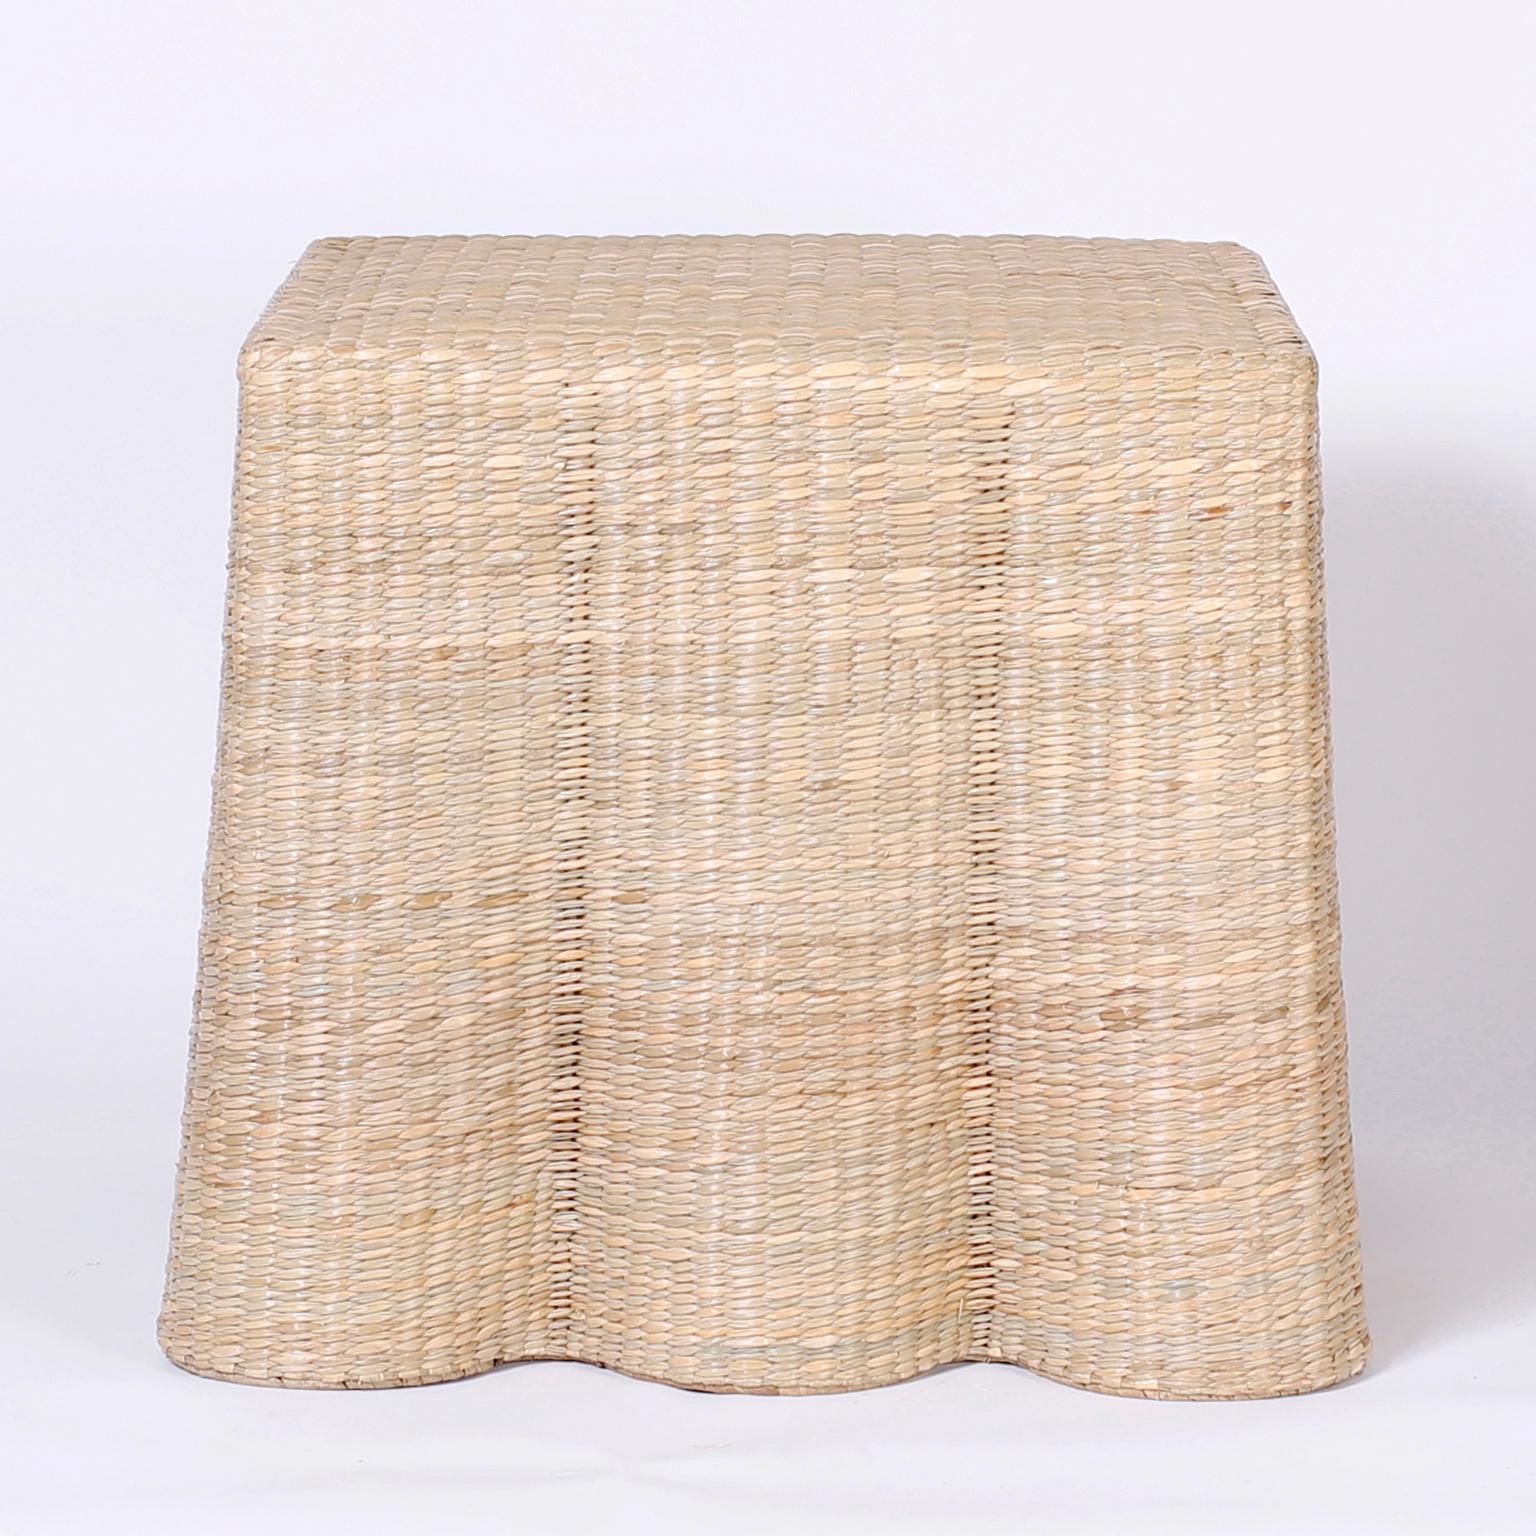 Mexican Pair of Wicker Drapery Ghost End Tables or Stands from the FS Flores Collection